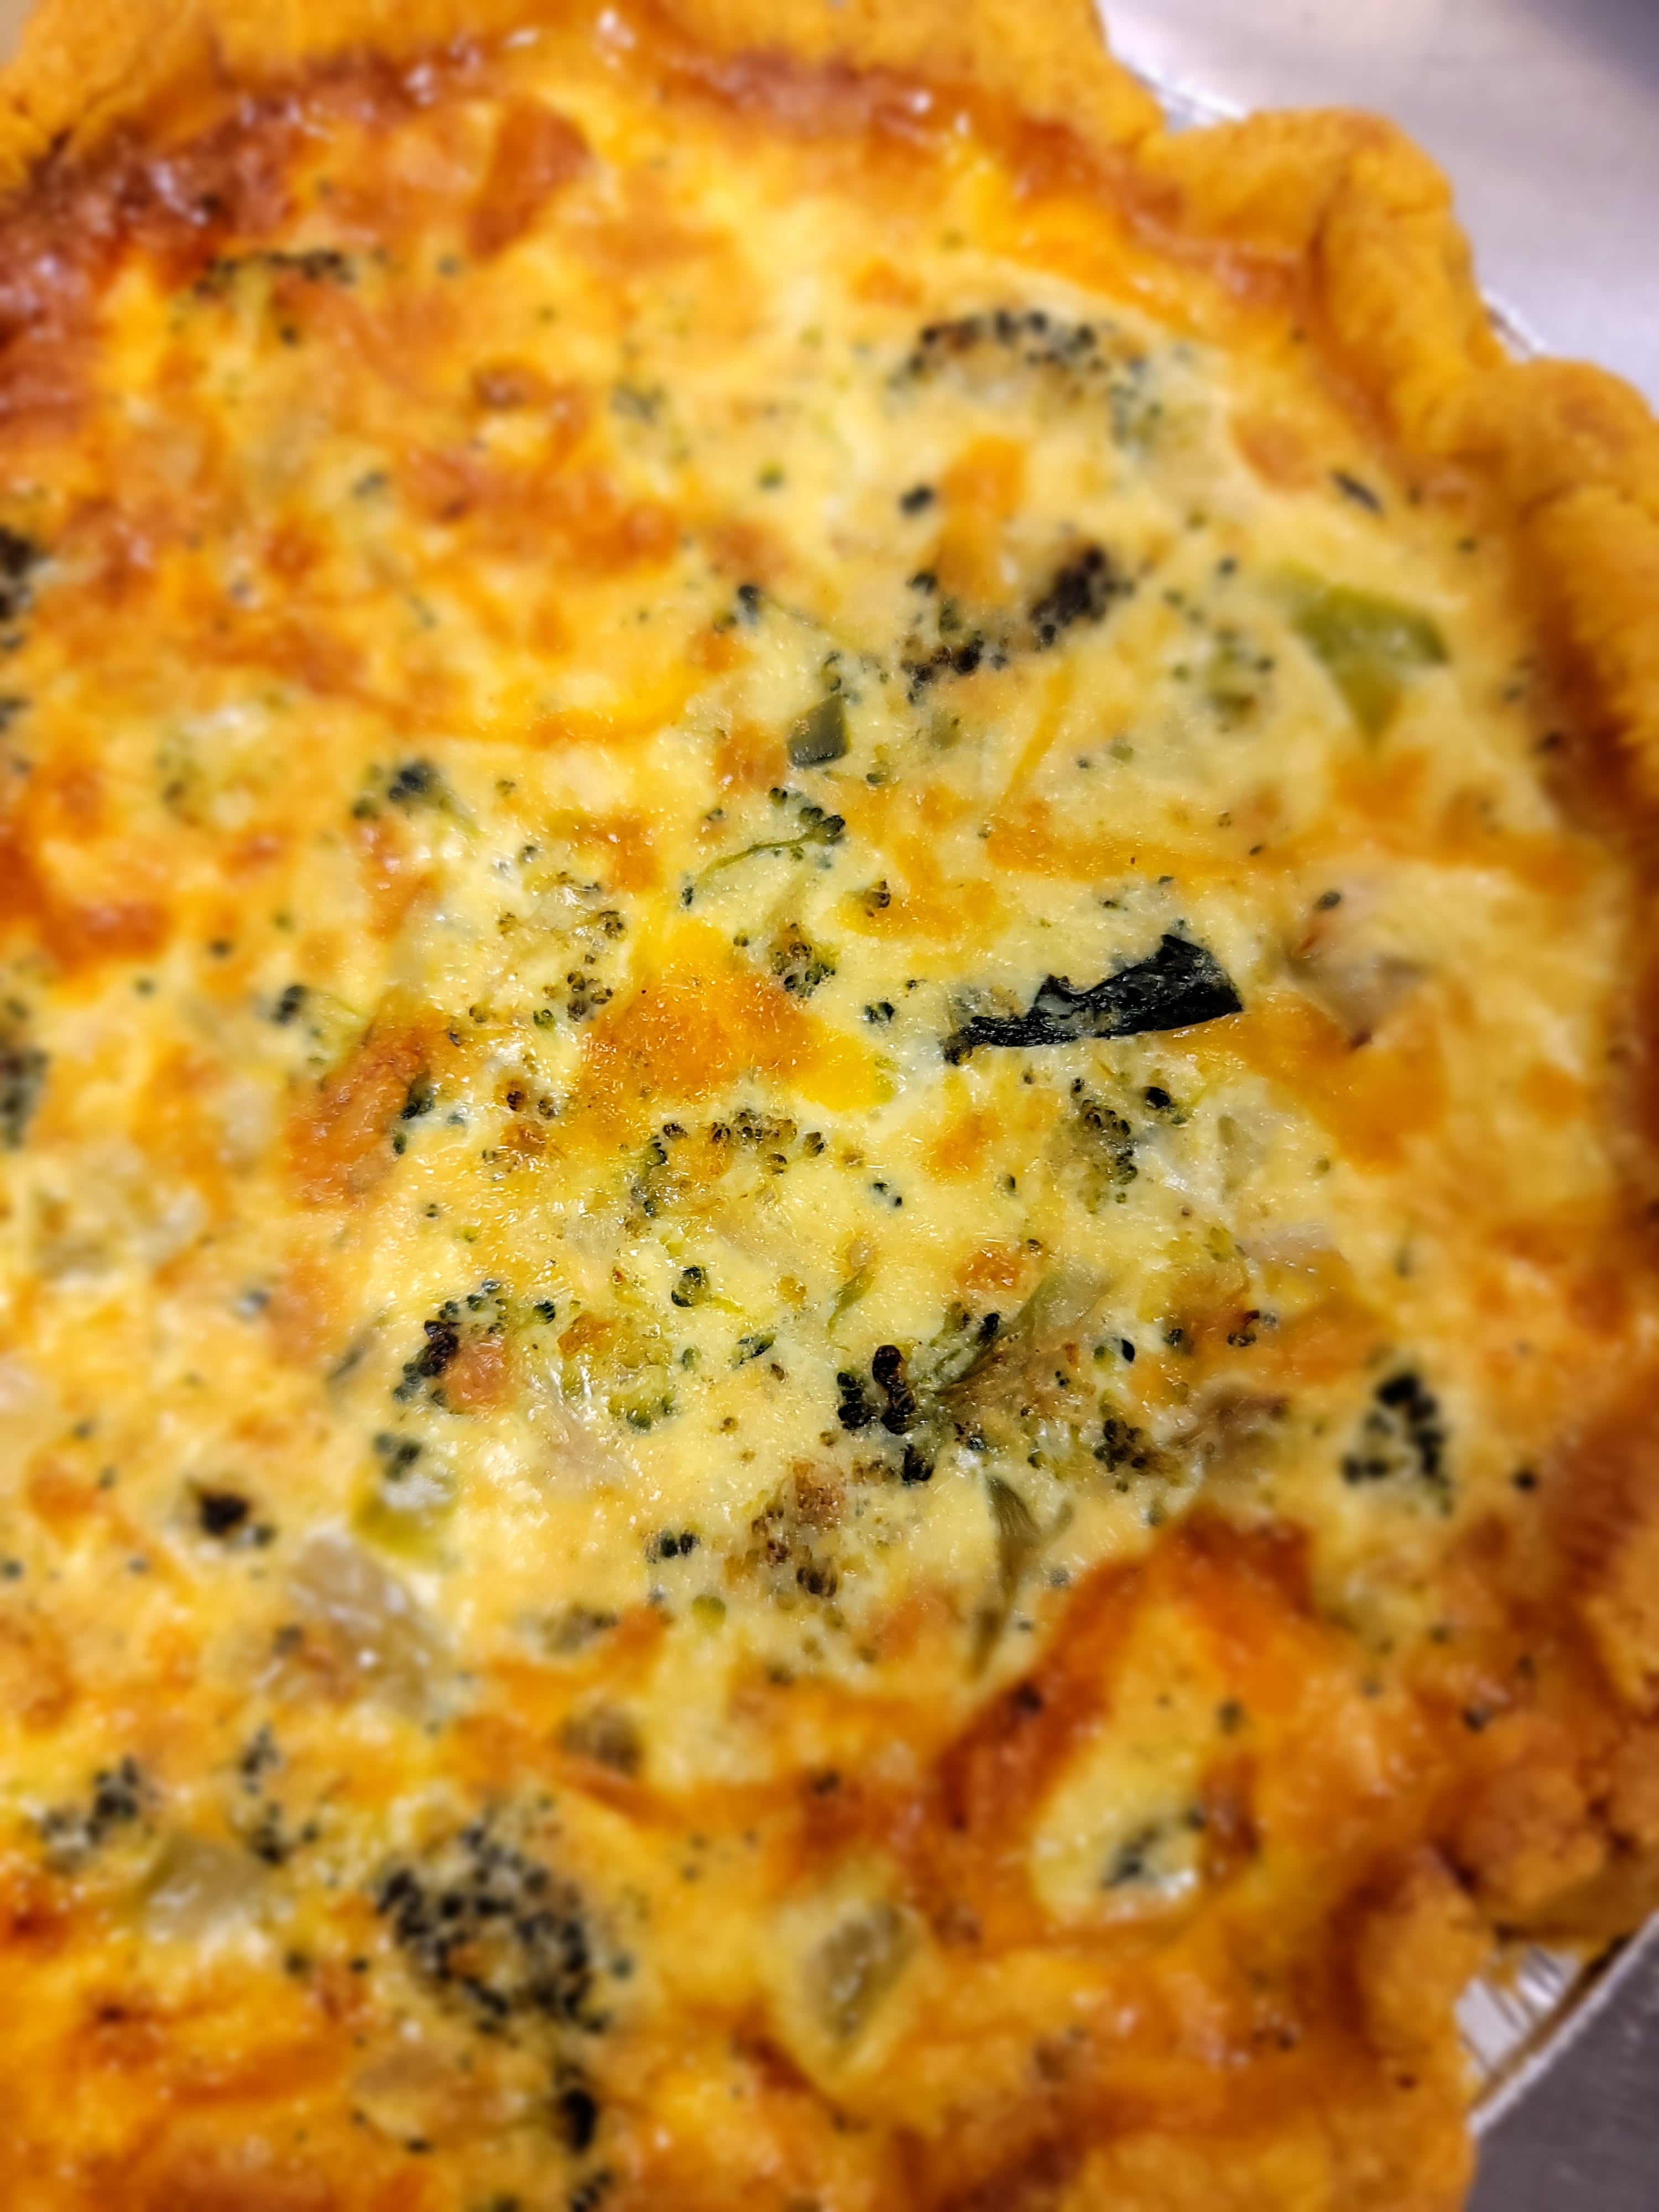 Gluten Free Broccoli and Cheddar Cheese